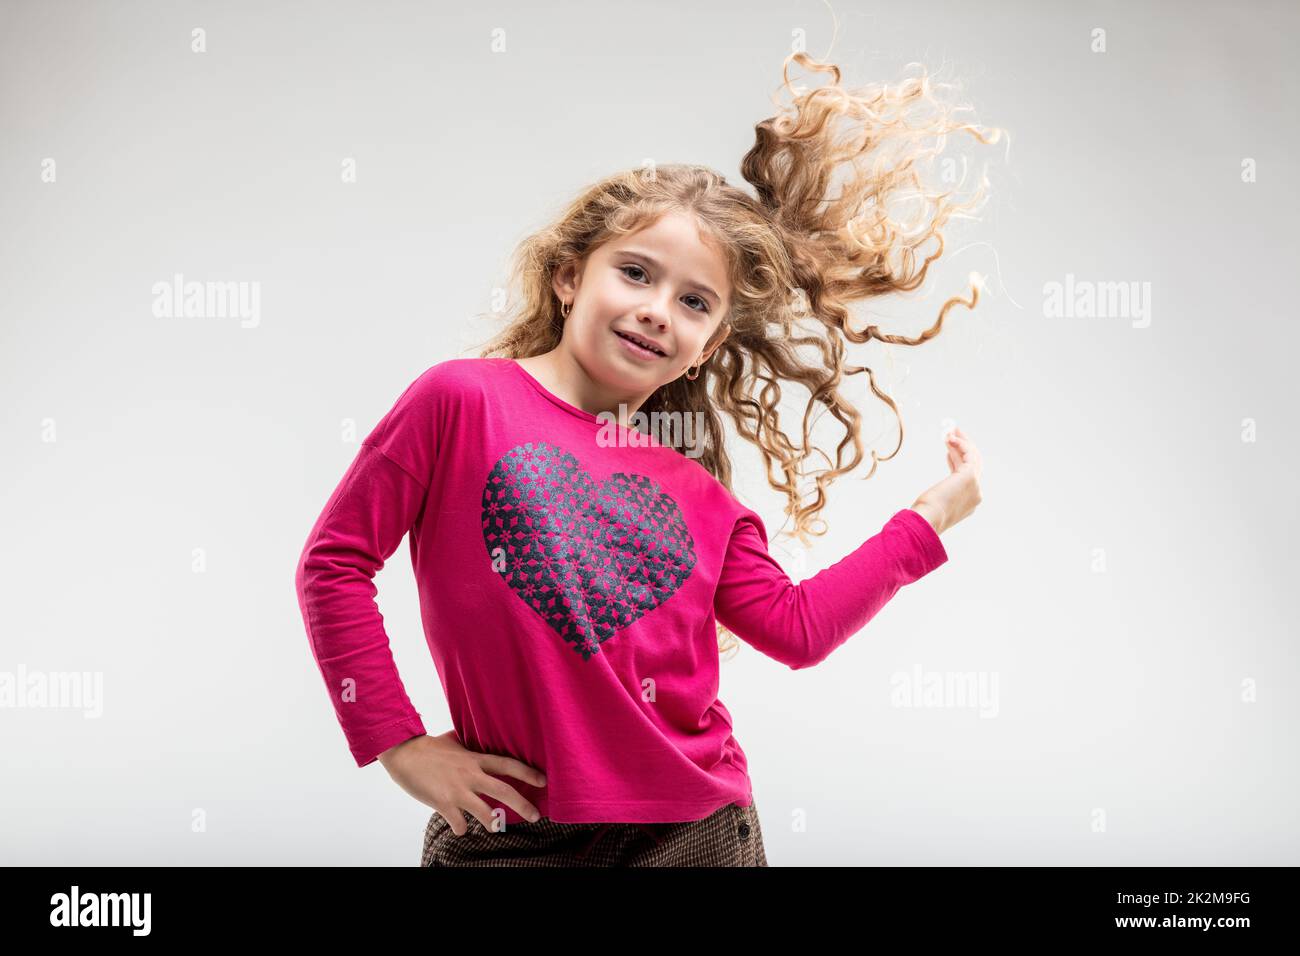 Cheerful preteen girl playing with her curly hair Stock Photo